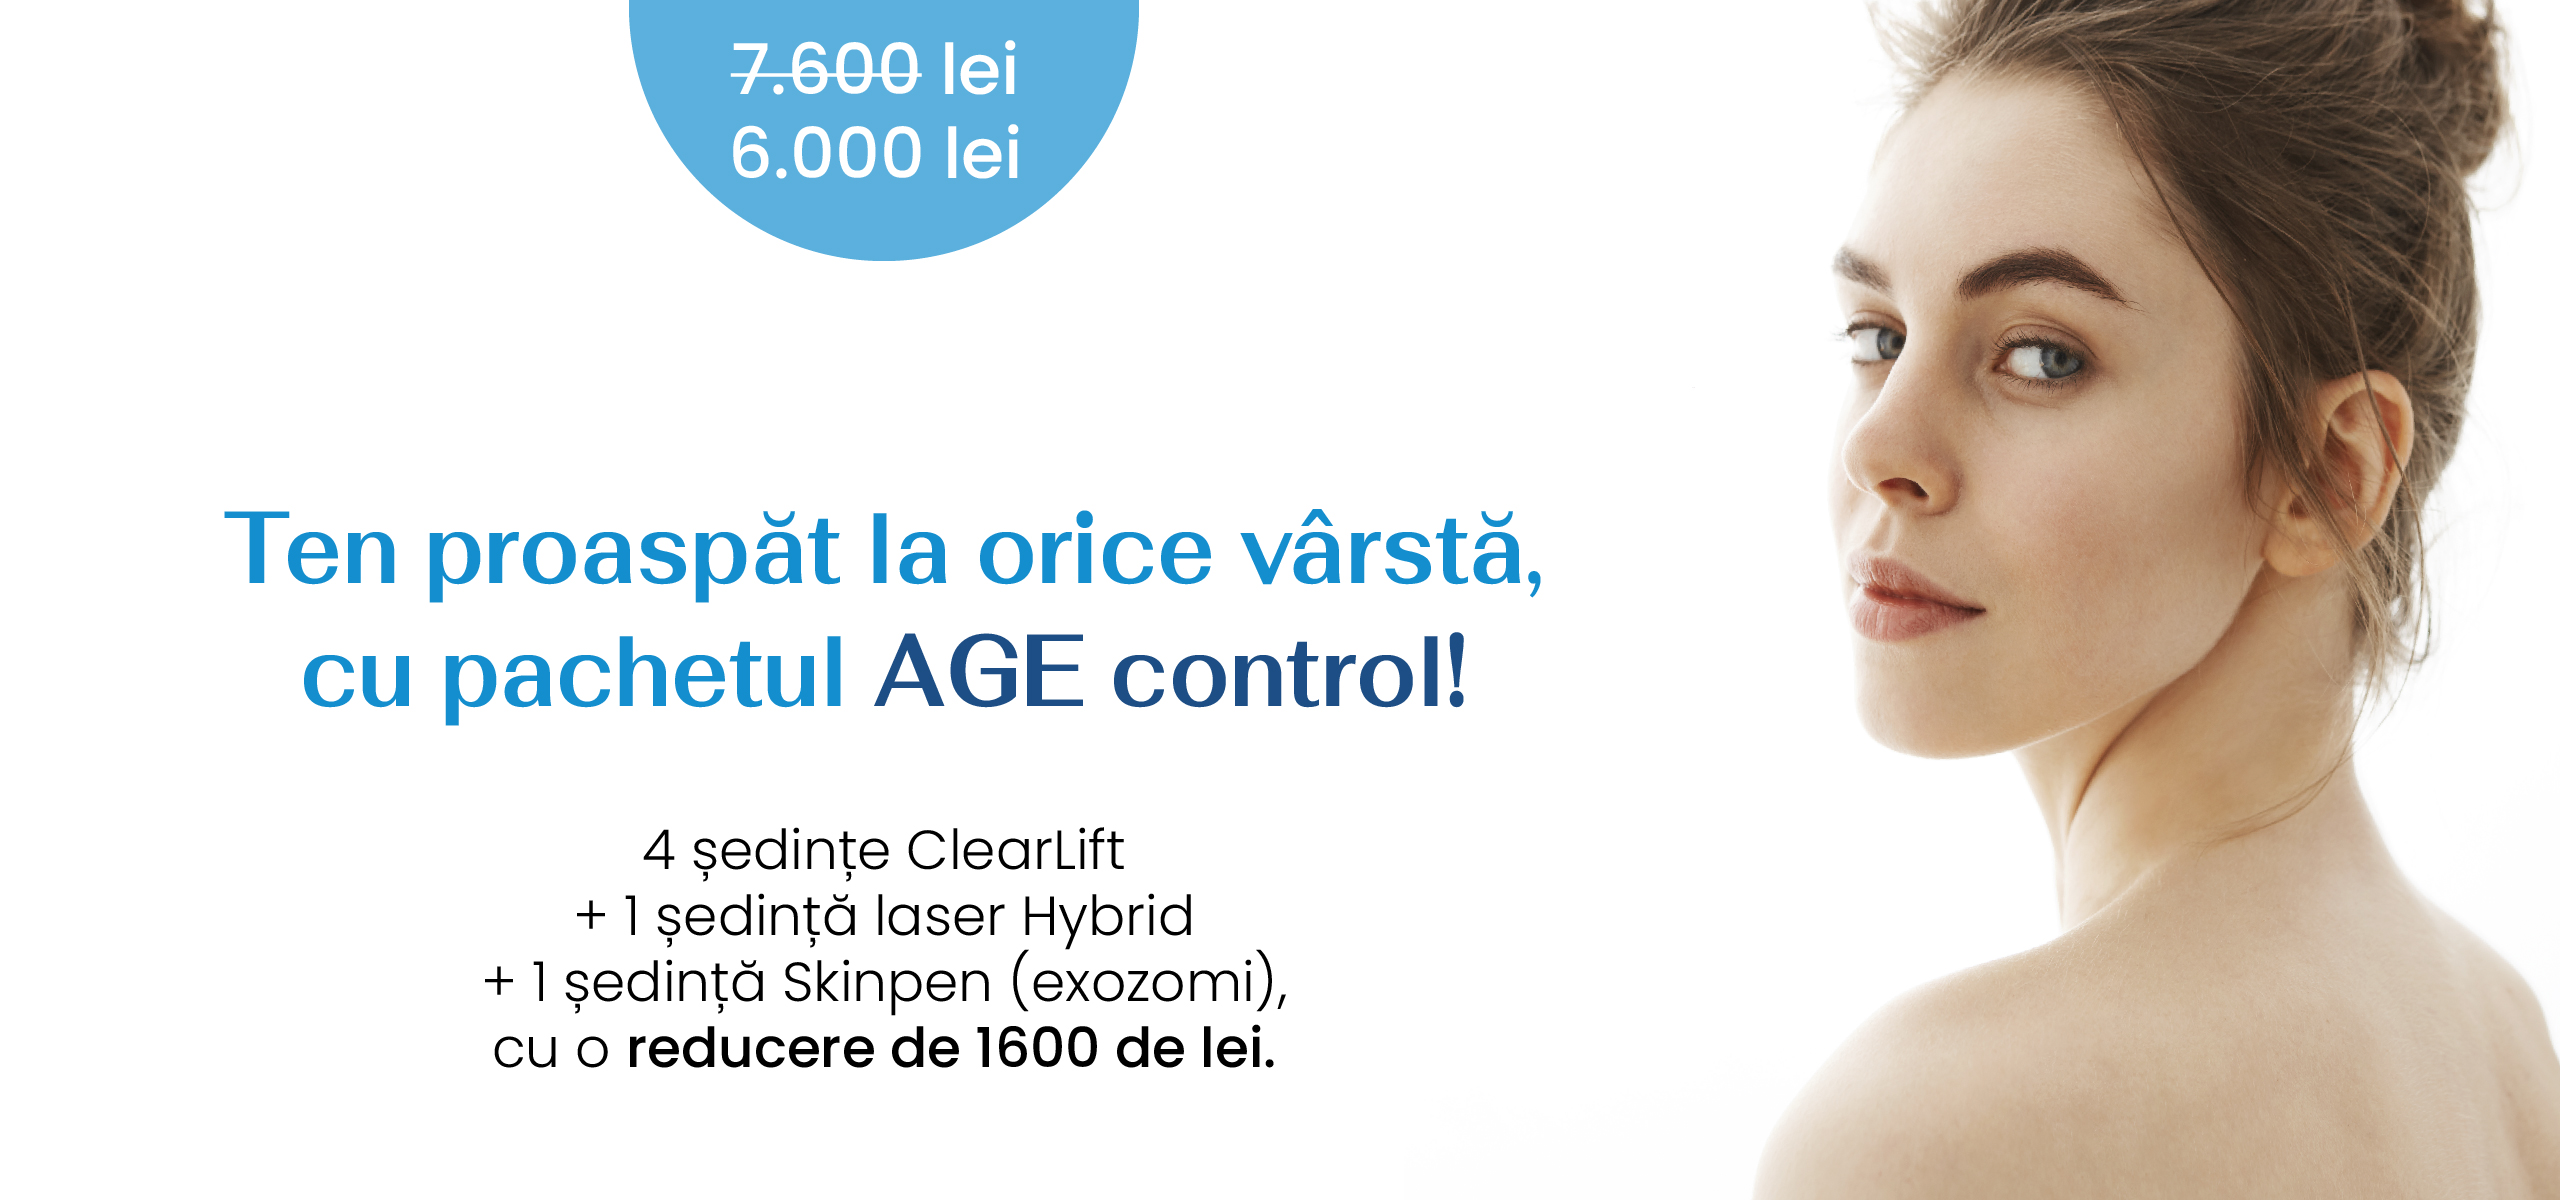 oferta septembrie 23 age control skinmed clinic